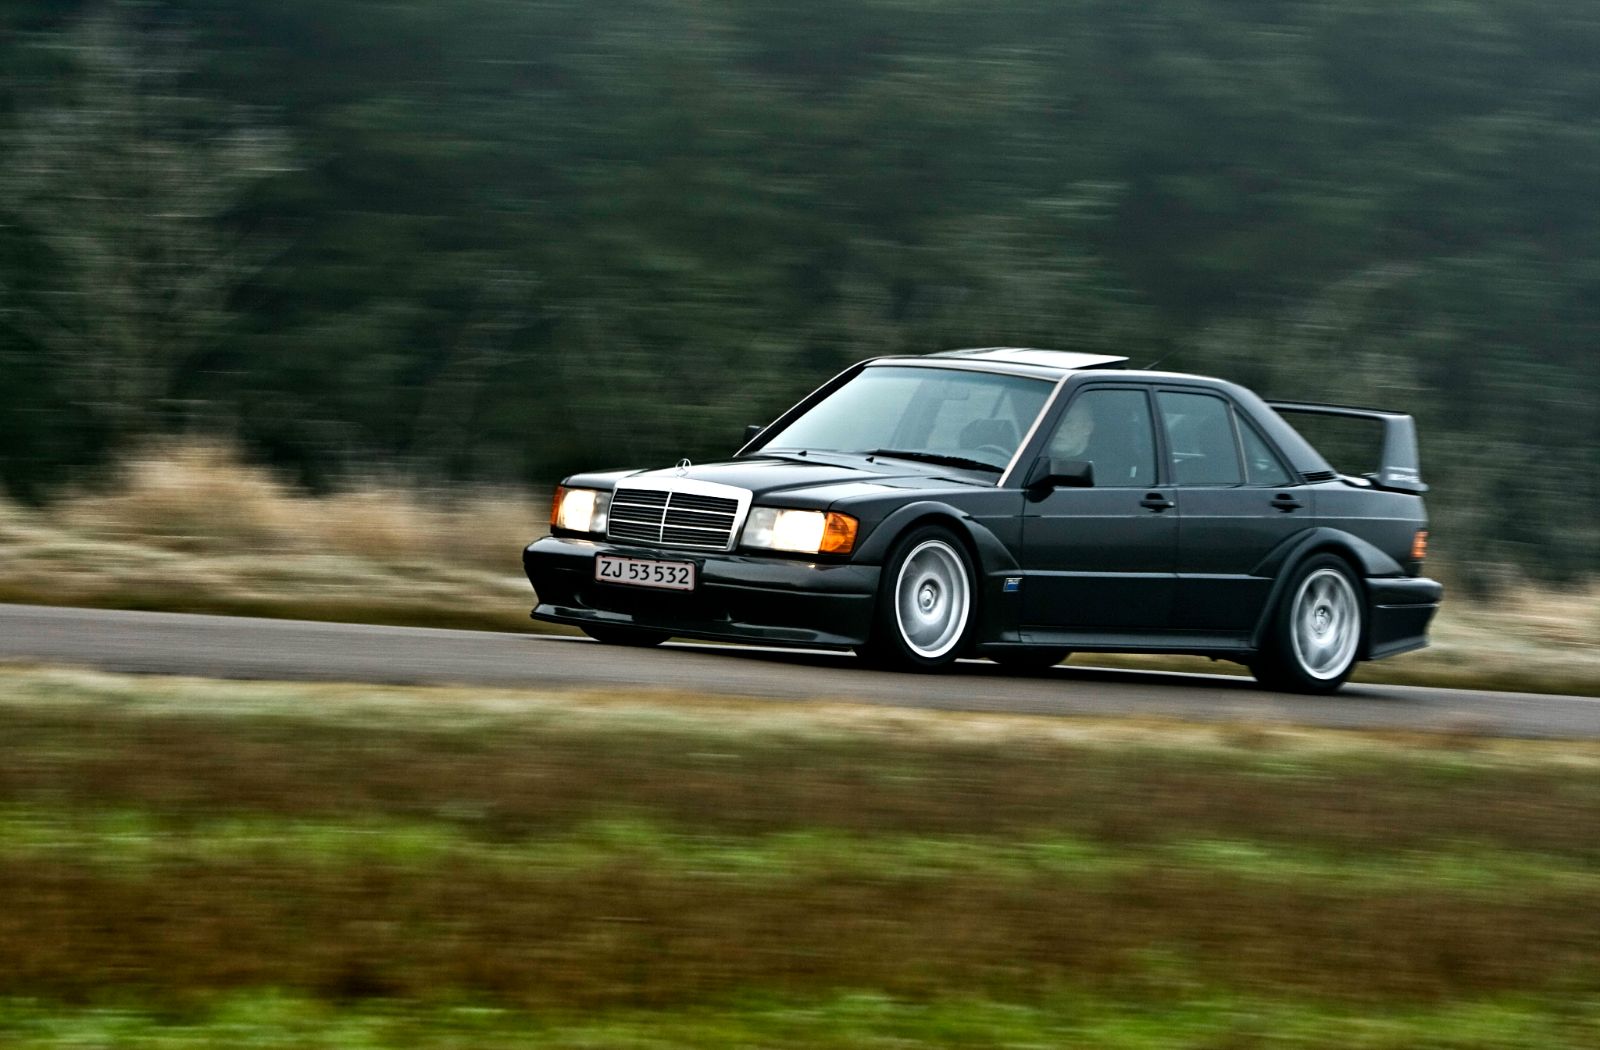 https://s1.cdn.autoevolution.com/images/news/mercedes-benz-190e-2516-evo-ii-the-story-of-the-cosworth-powered-amg-tuned-legend-224905_1.jpg